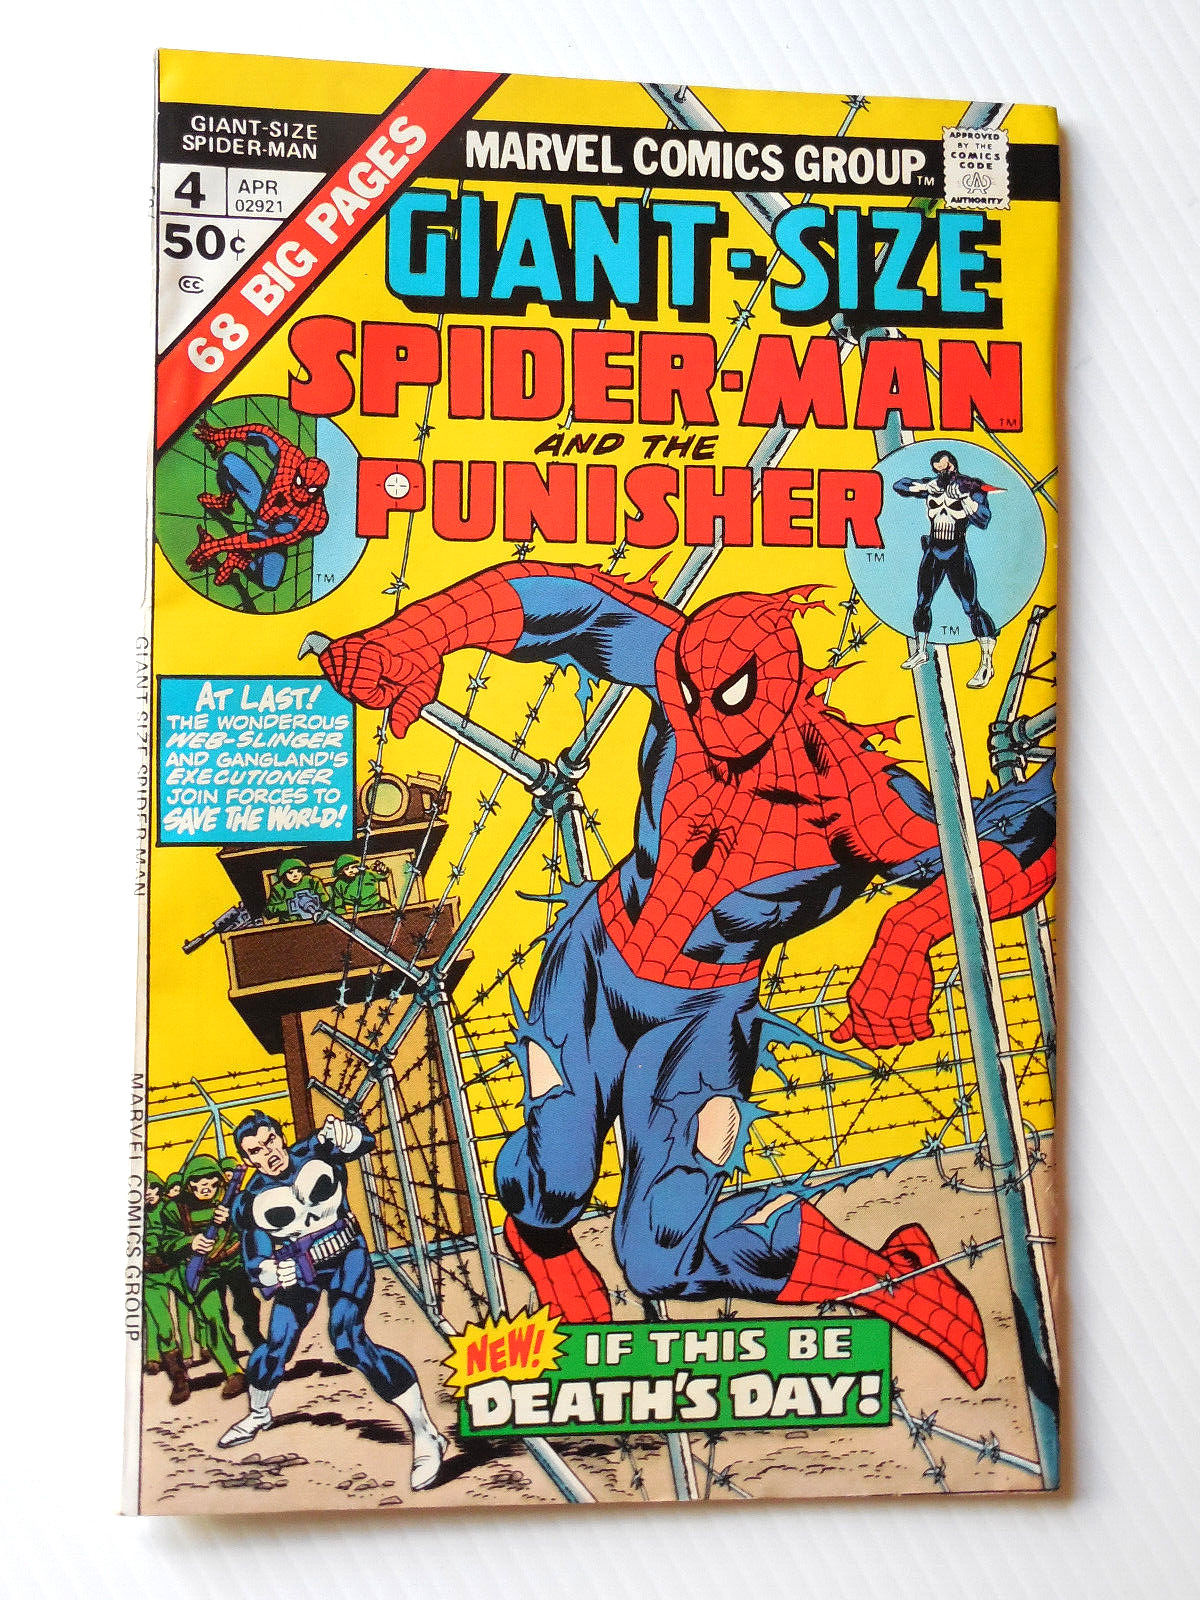 GIANT-SIZE SPIDER-MAN AND THE PUNISHER NO. 4 MARVEL COMICS 1975 VOL 1 KEY ISSUE